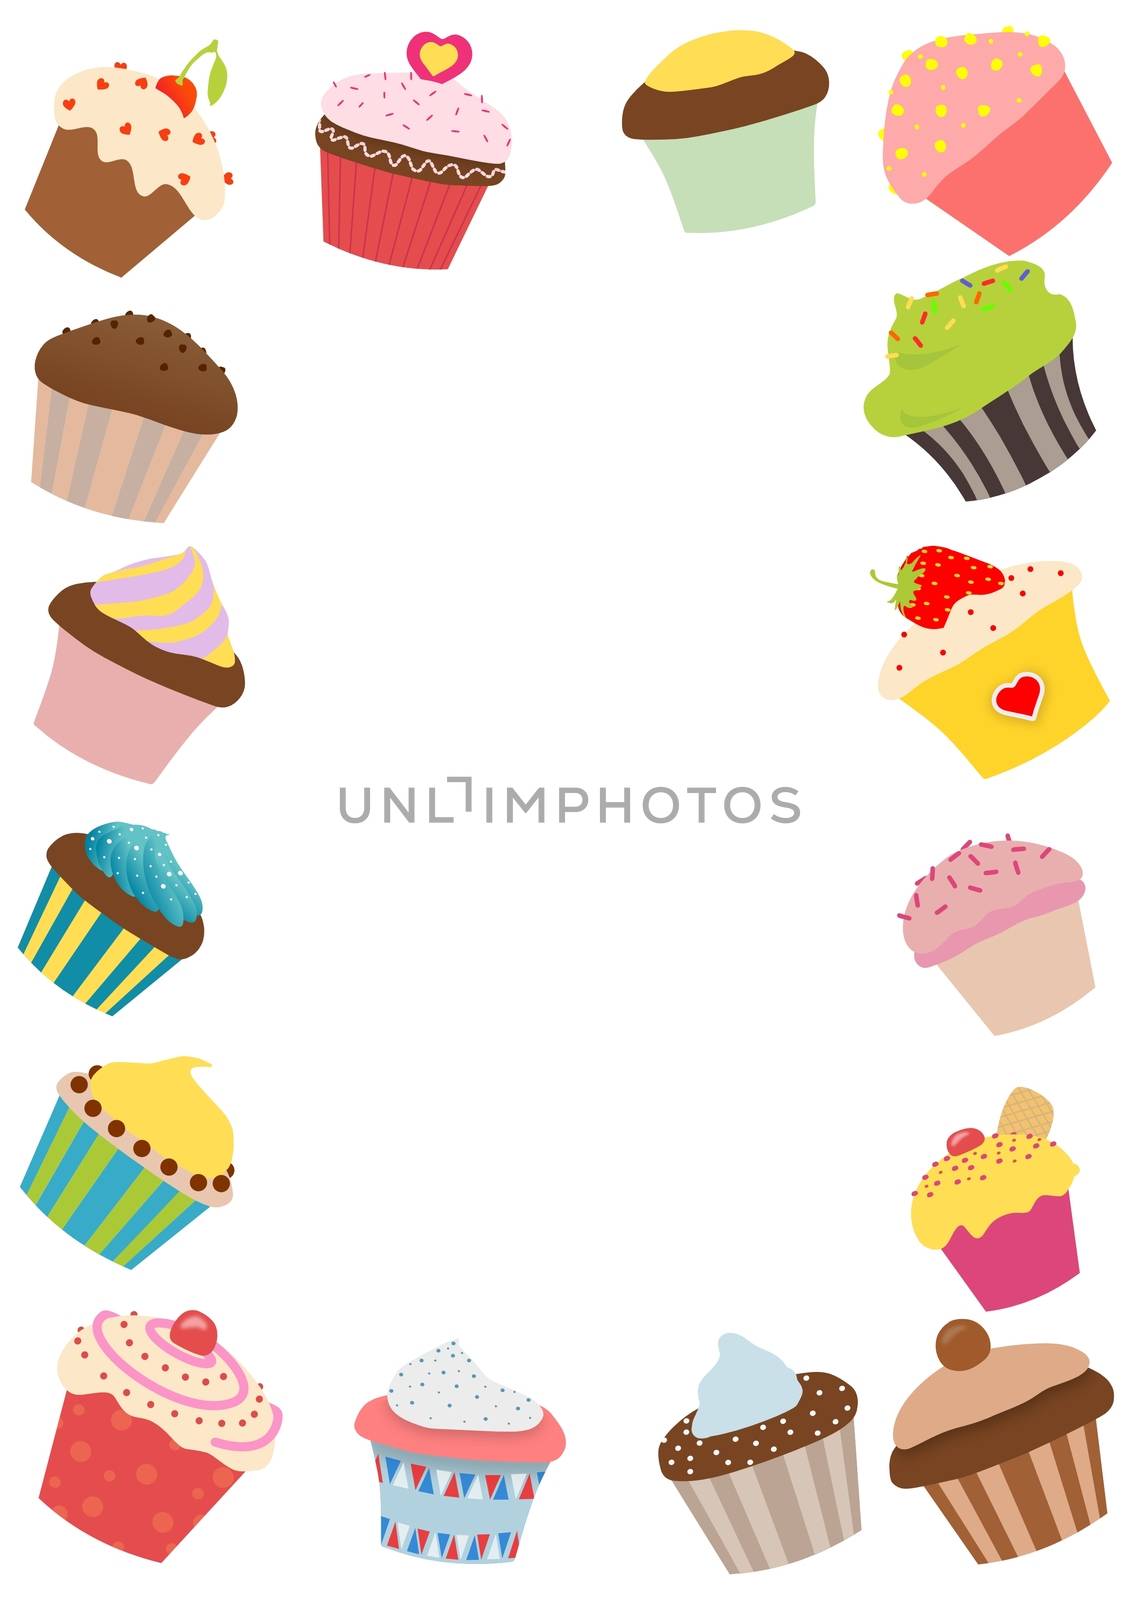 A illustrated frame made of cupcakes